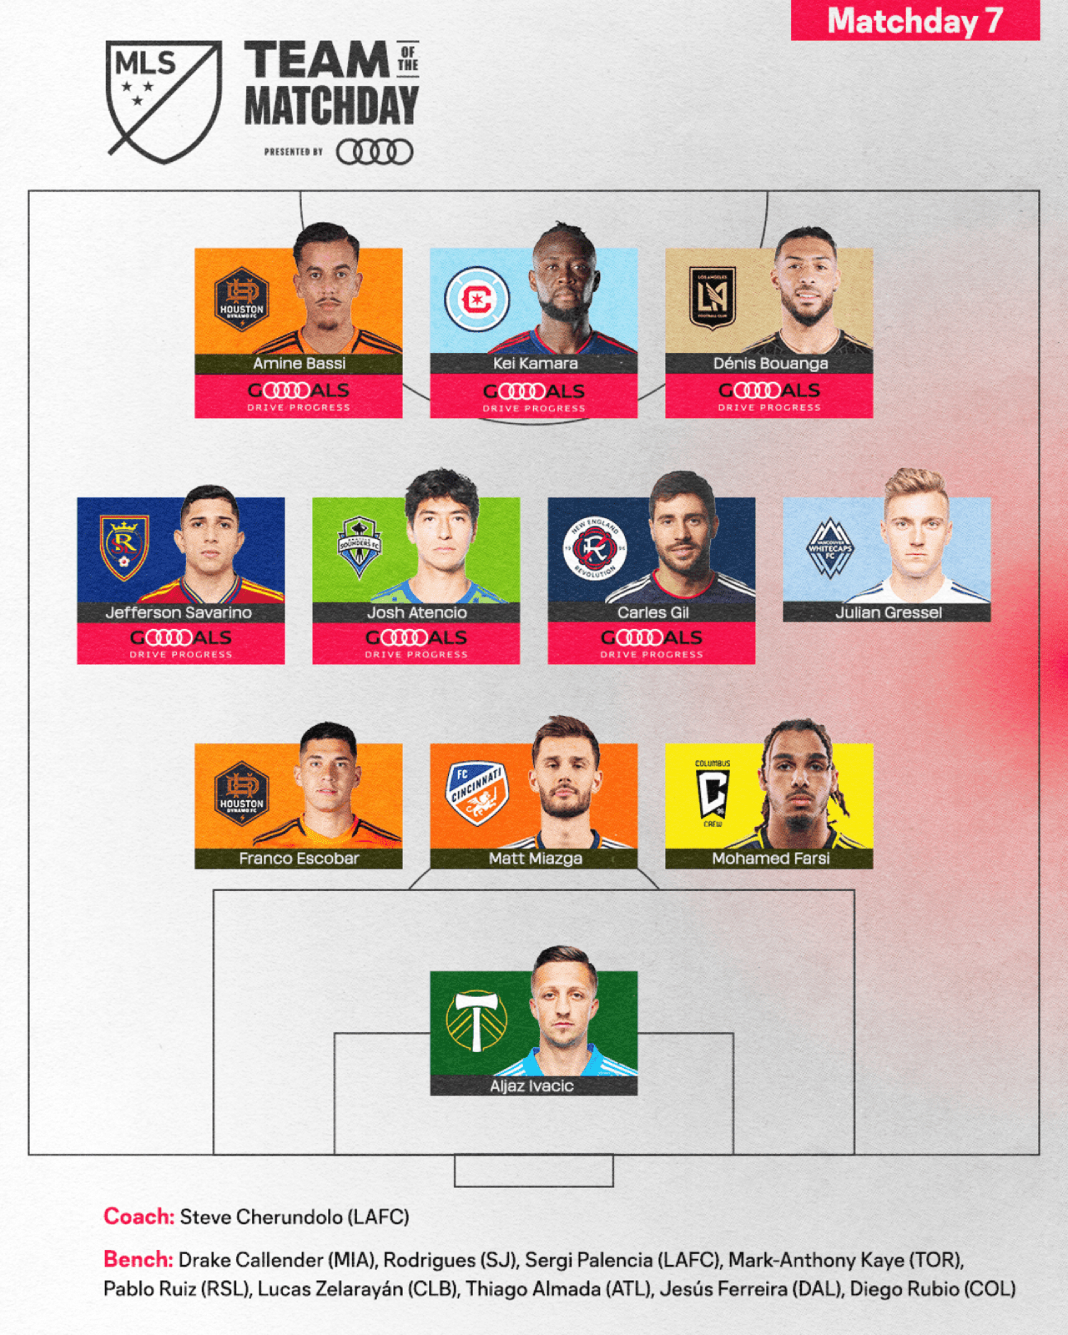 Team of the Matchday 7